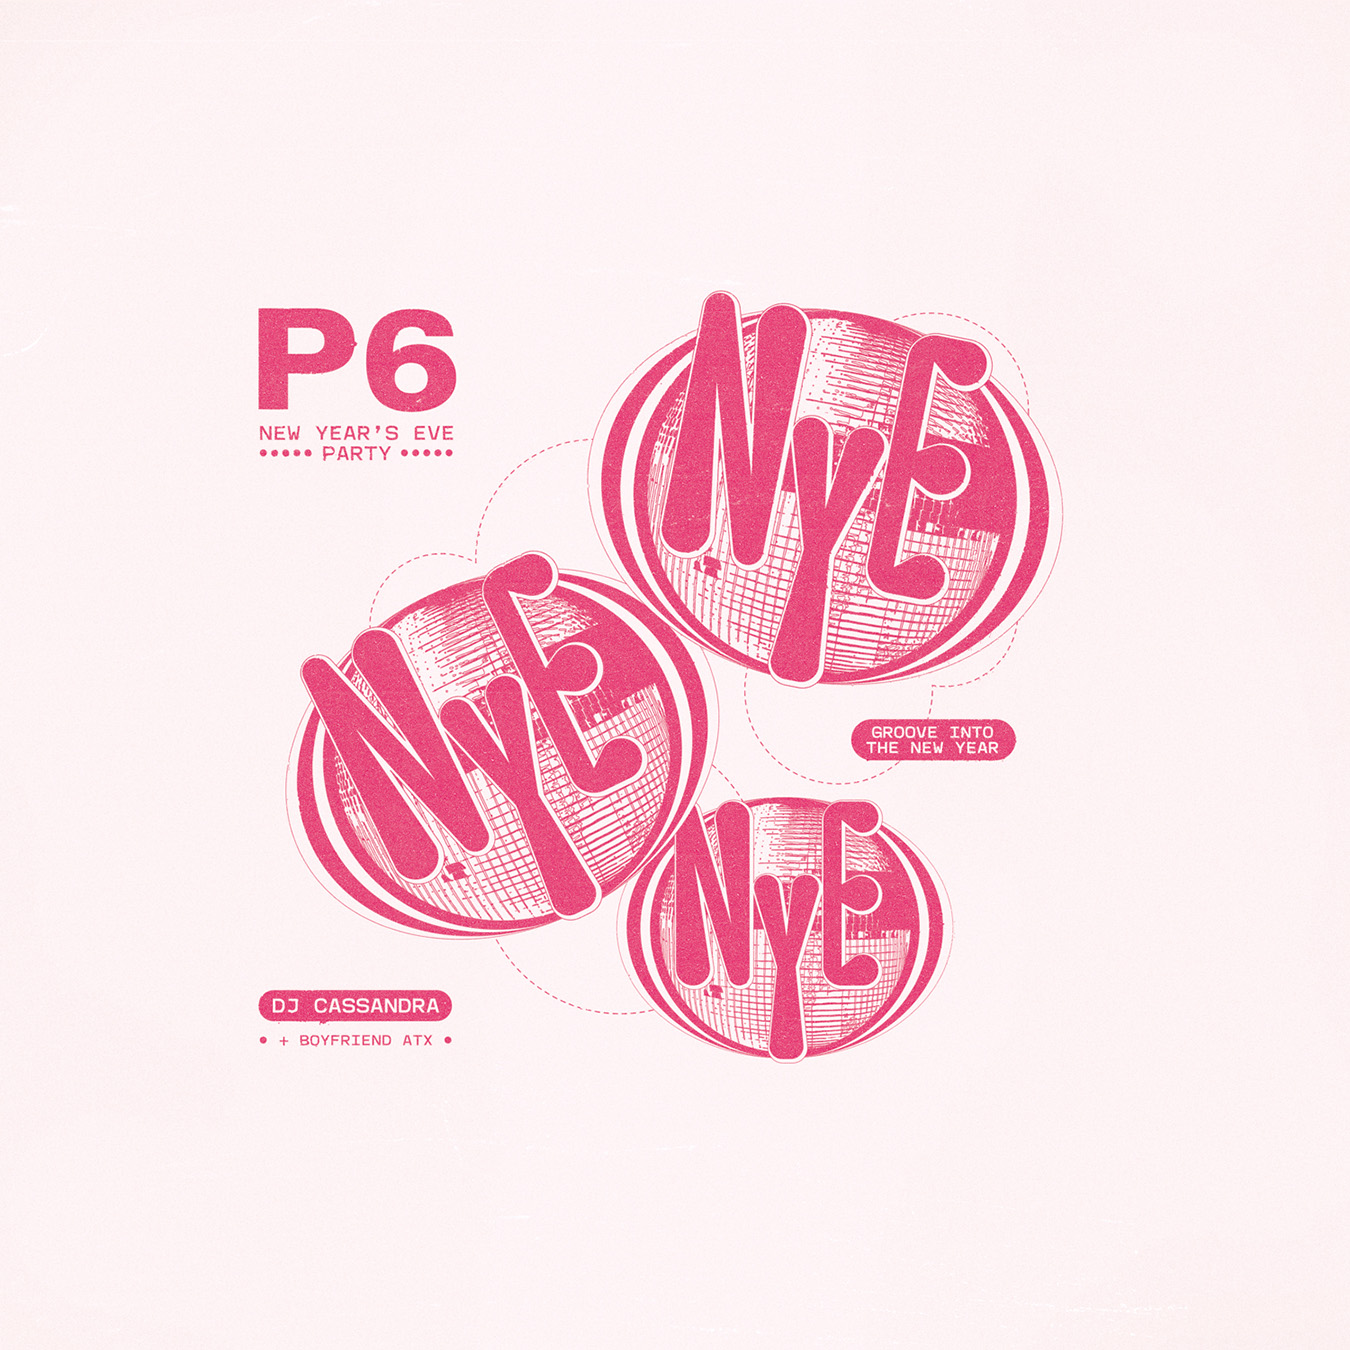 "P6 New Year's Eve Party" brochure adorned with pink logos and festive text.